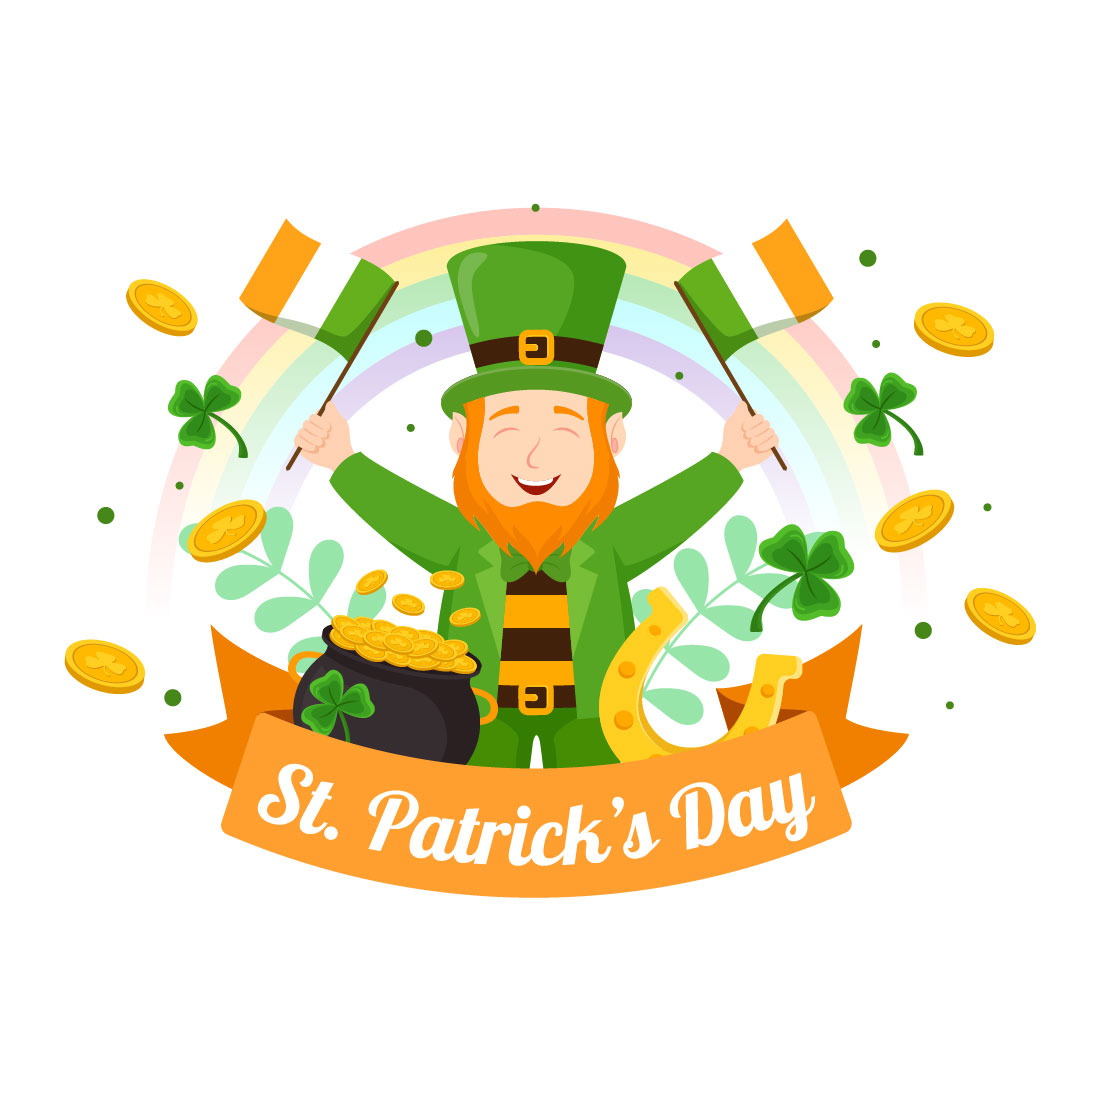 14 Happy St Patrick's Day Illustration cover image.